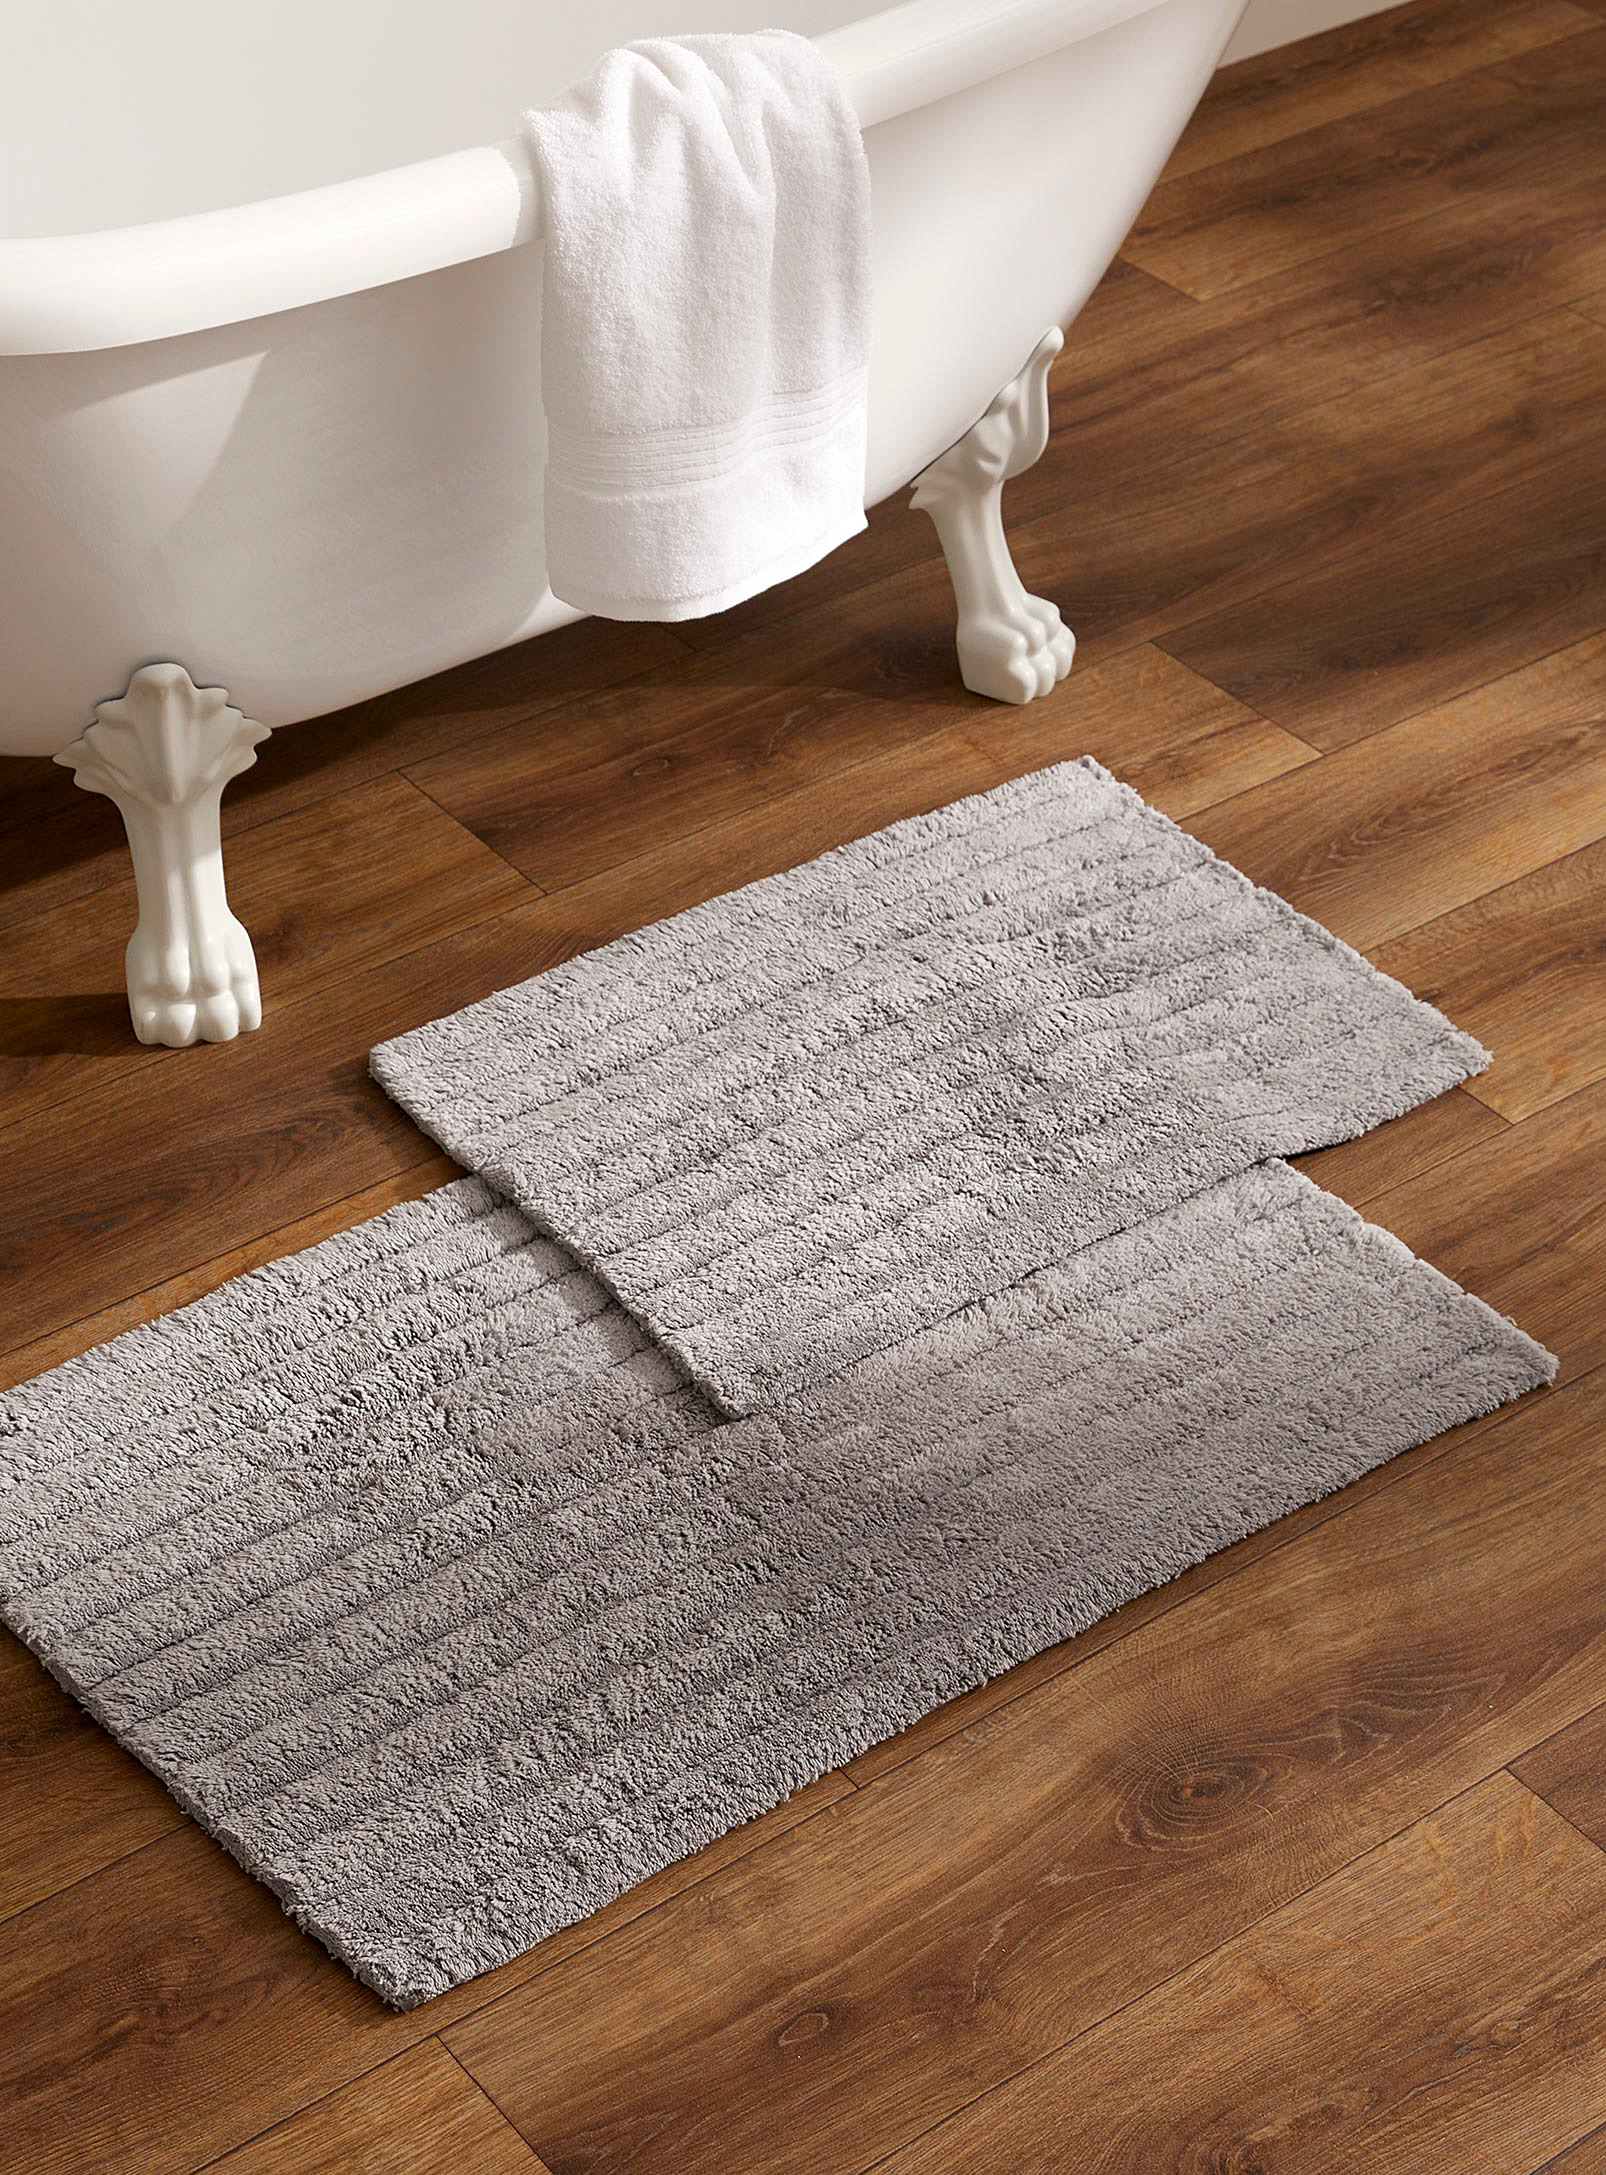 Simons Maison Horizontal Strips Bath Mat See Available Sizes In Brown